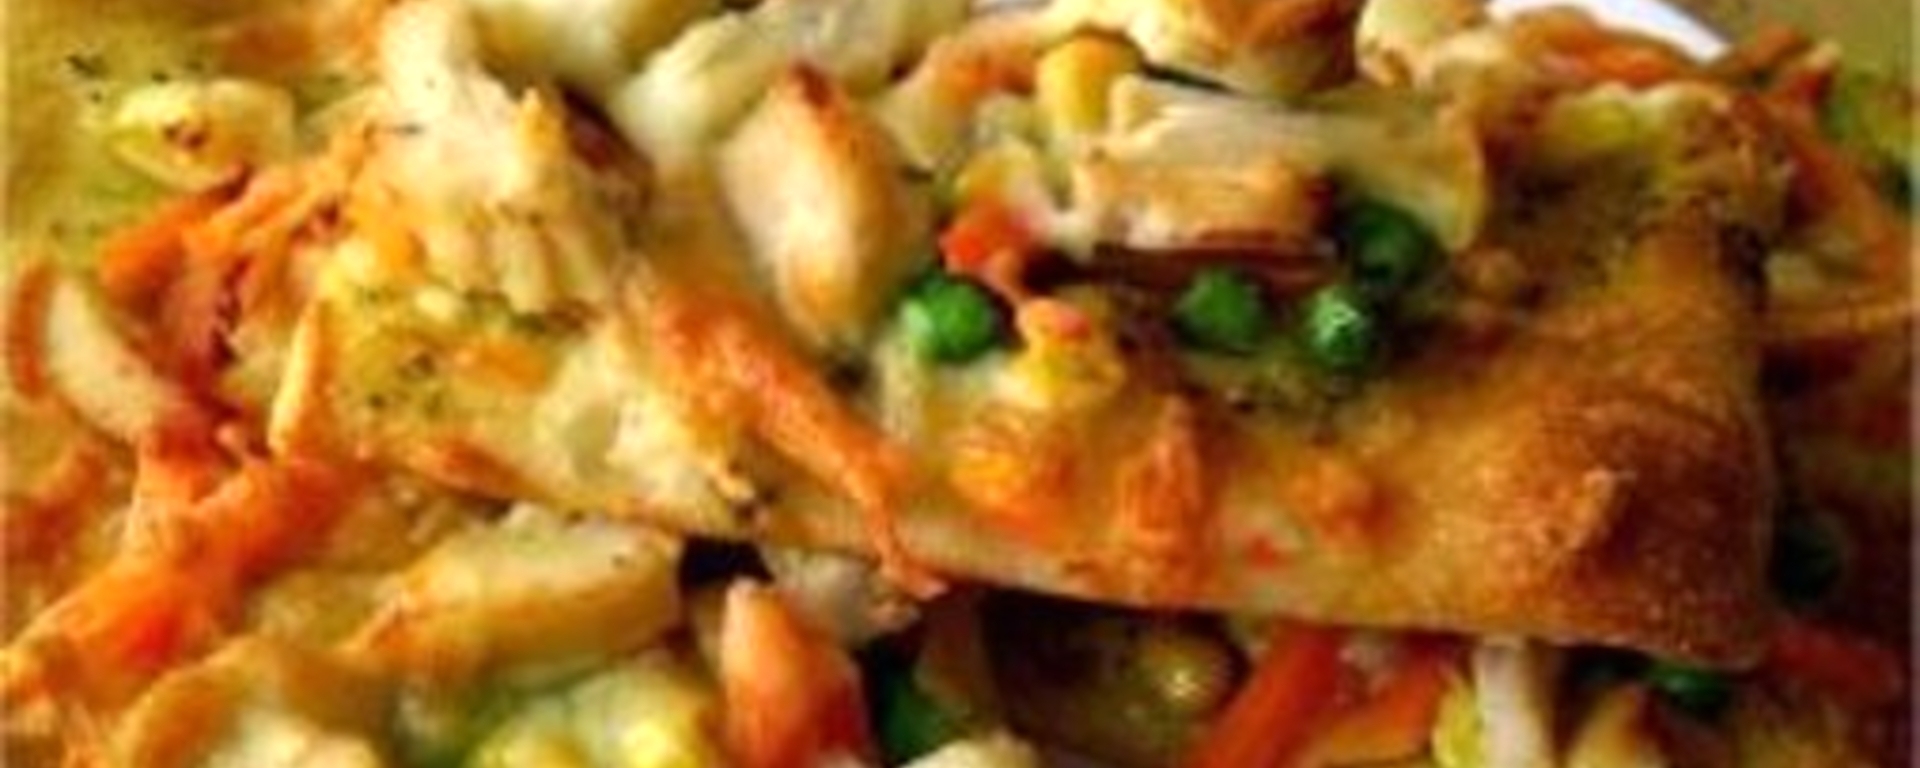 LuvMyRecipe.com - Best Pizza Recipe With Leftovers Vegetables Featured